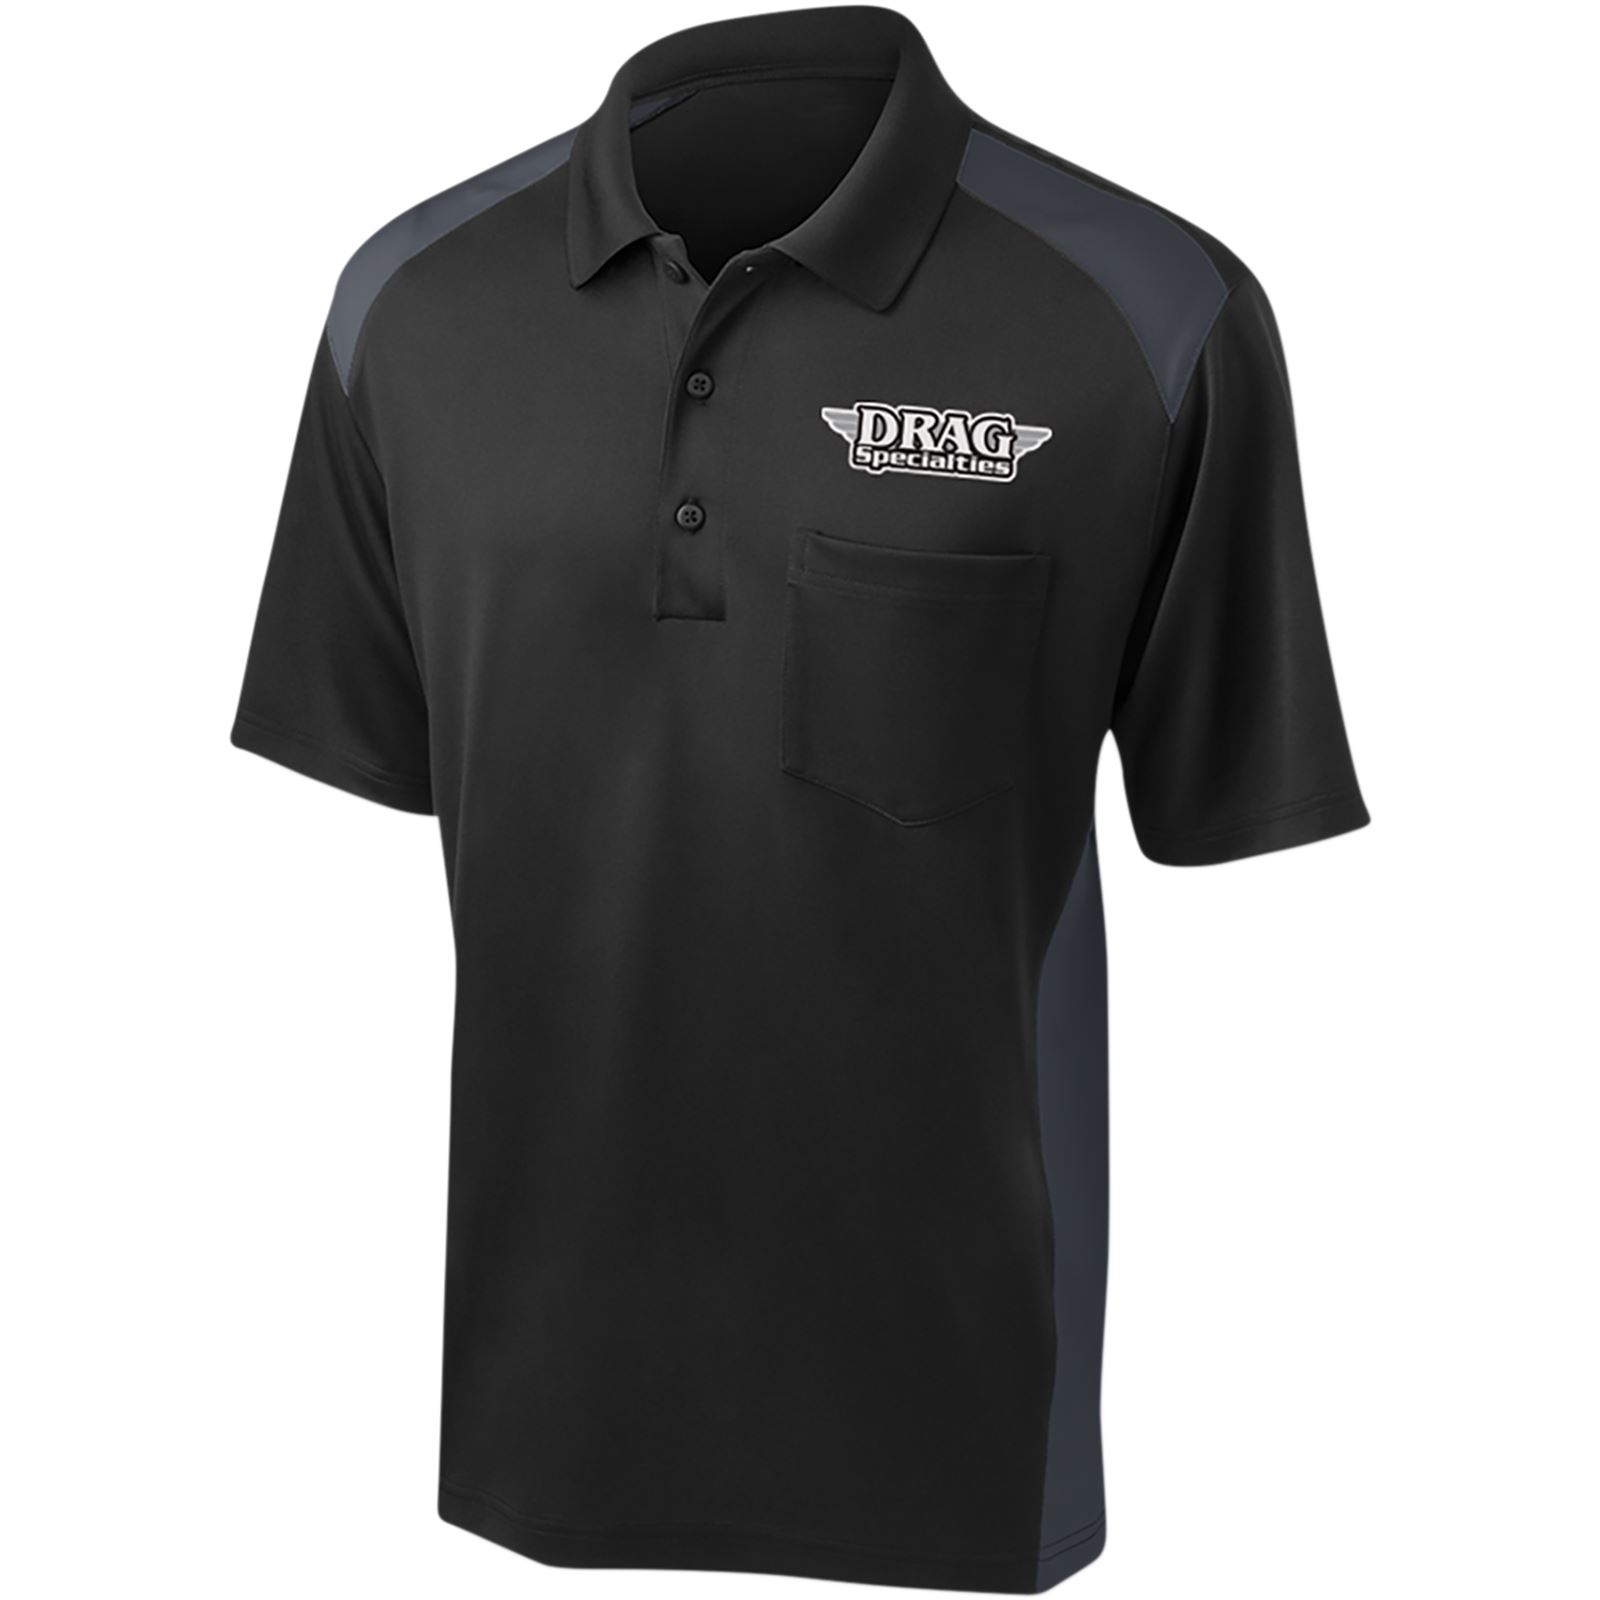 Throttle Threads Drag Specialties Polo - Black/Charcoal Large